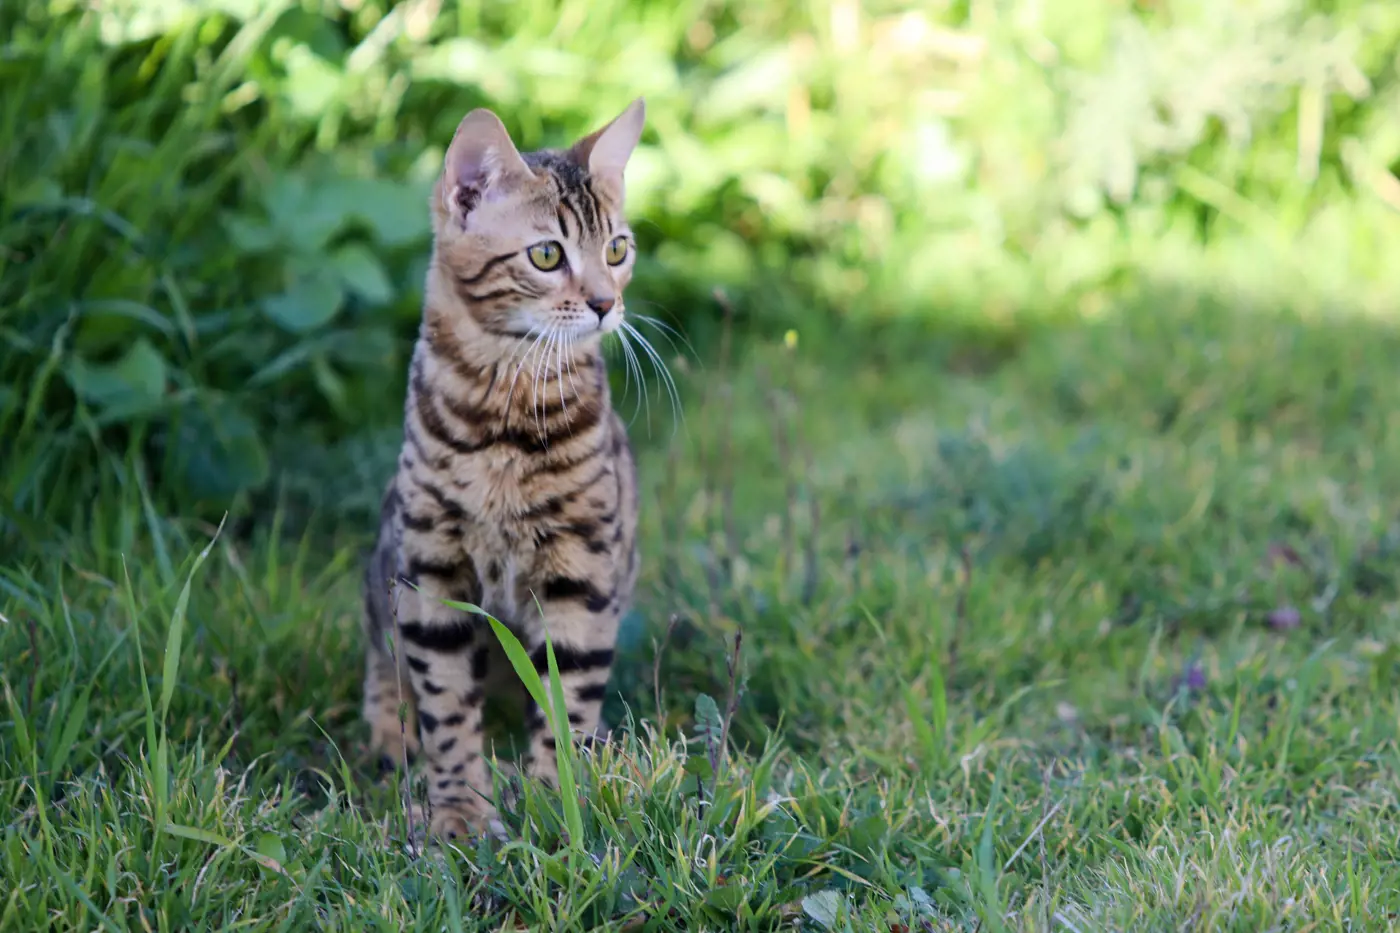  a bengal cat sat in the grass